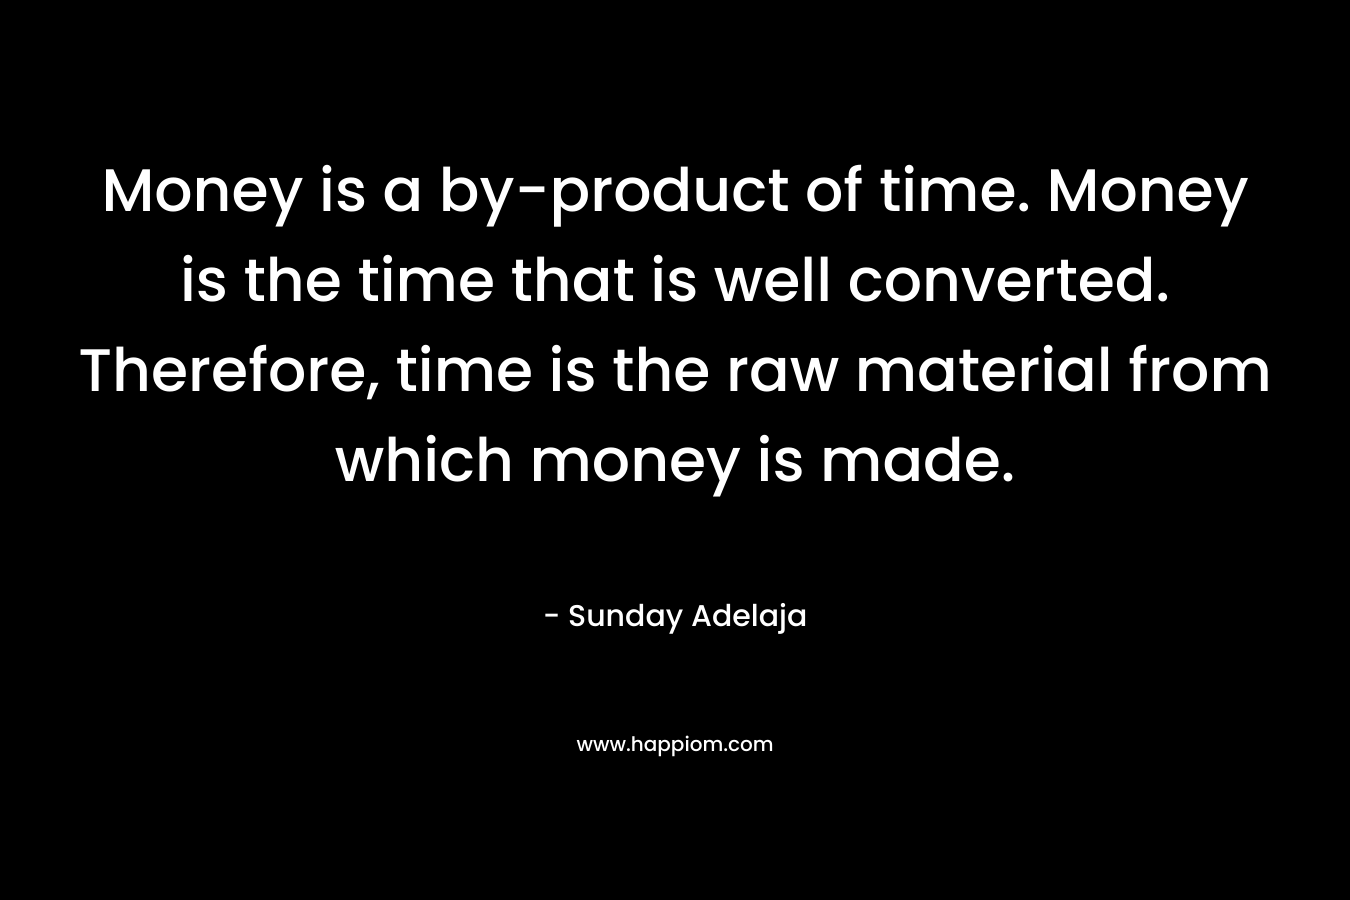 Money is a by-product of time. Money is the time that is well converted. Therefore, time is the raw material from which money is made.